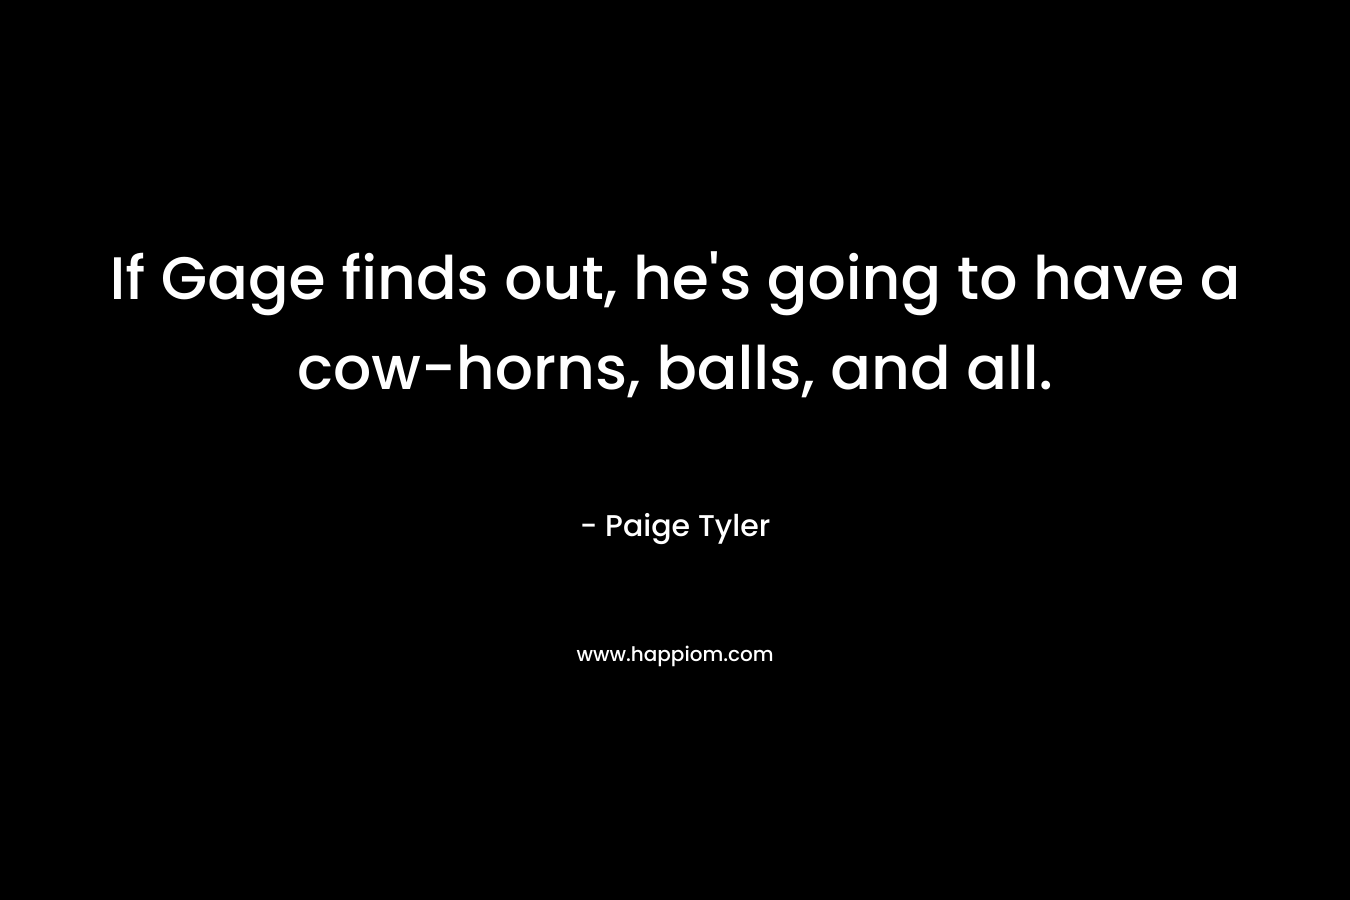 If Gage finds out, he’s going to have a cow-horns, balls, and all. – Paige Tyler